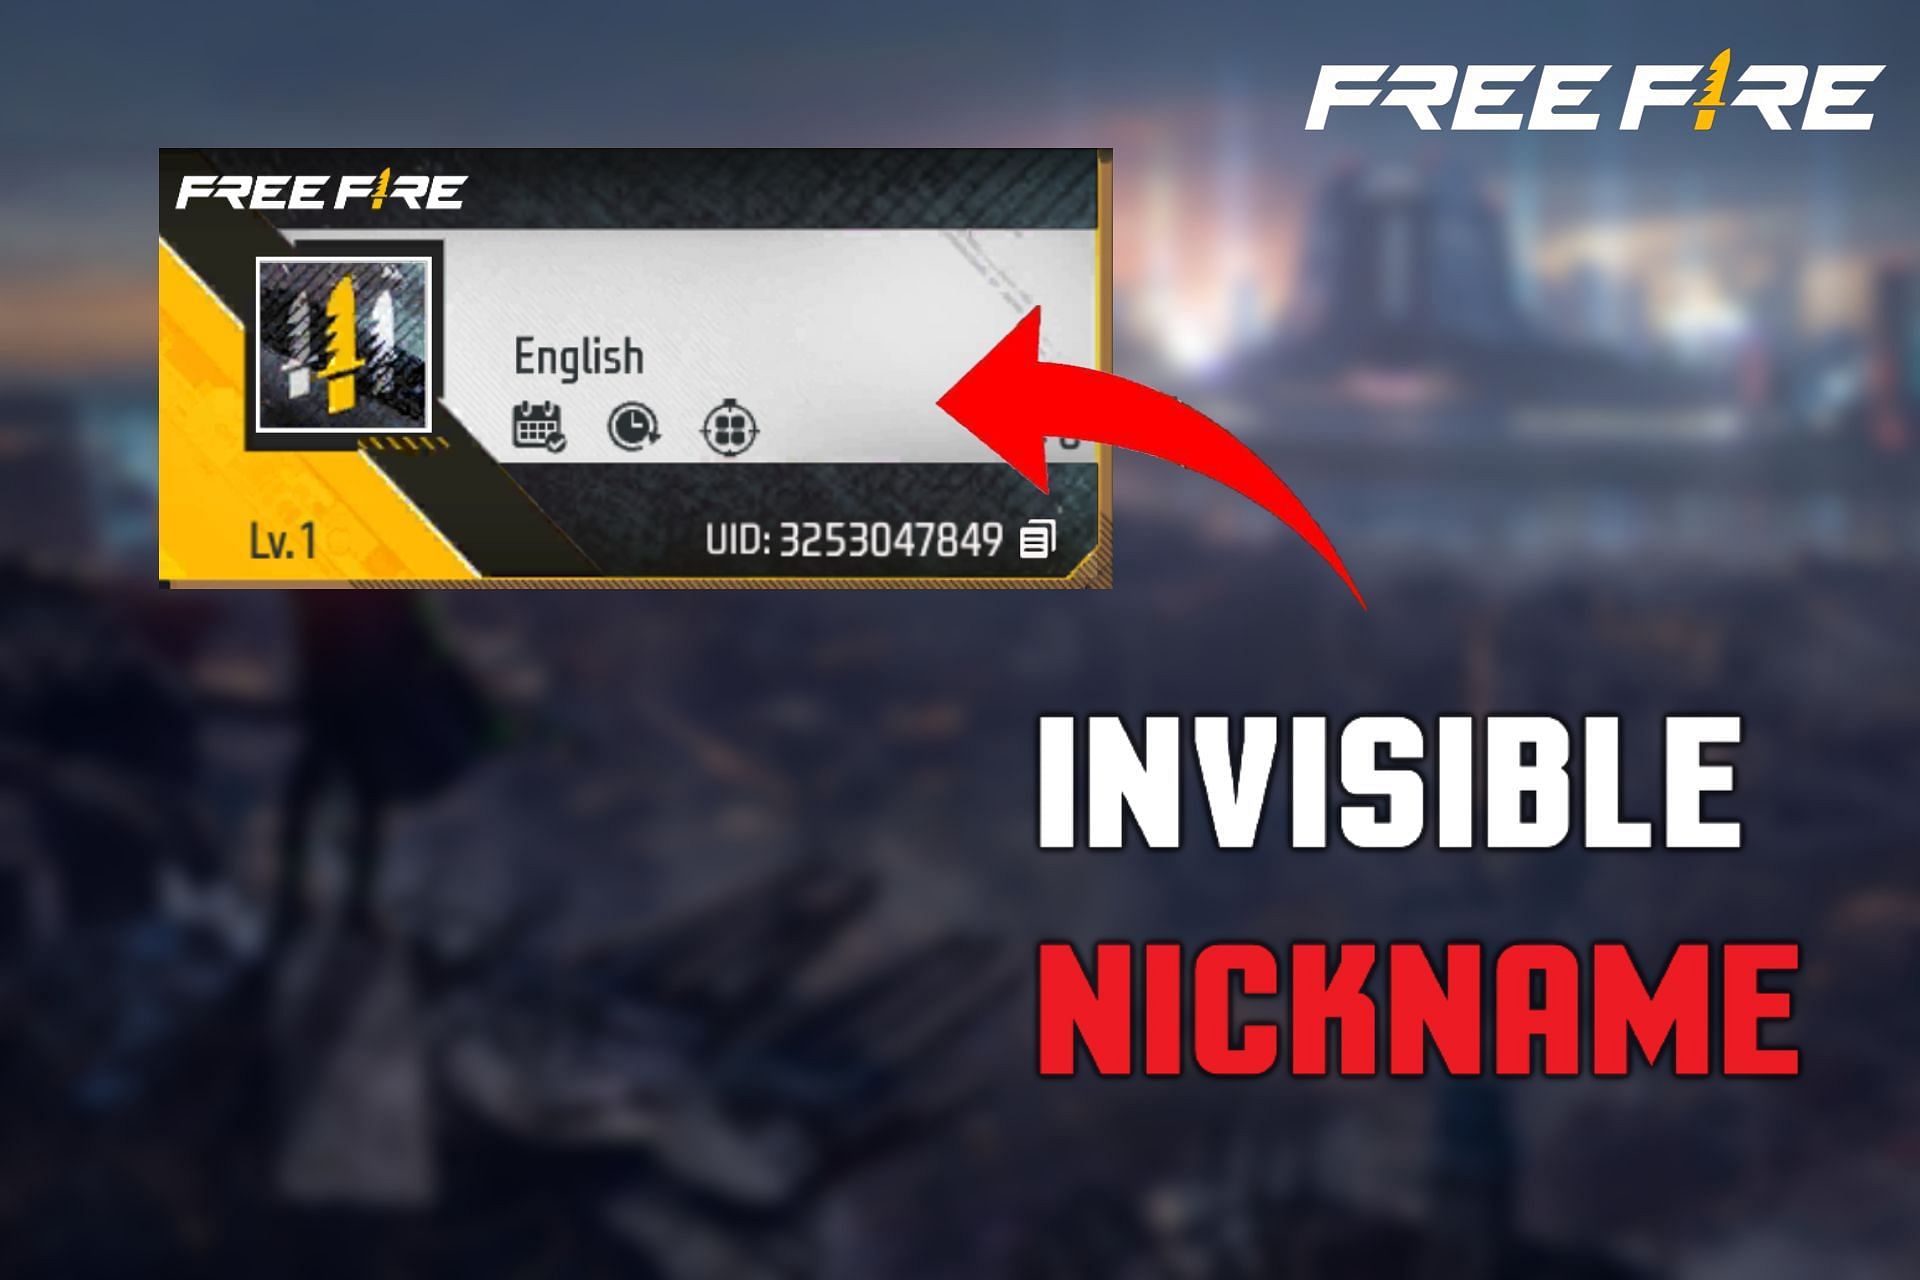 Guide on how to create an invisible name in Free Fire (Image via Sportskeeda)